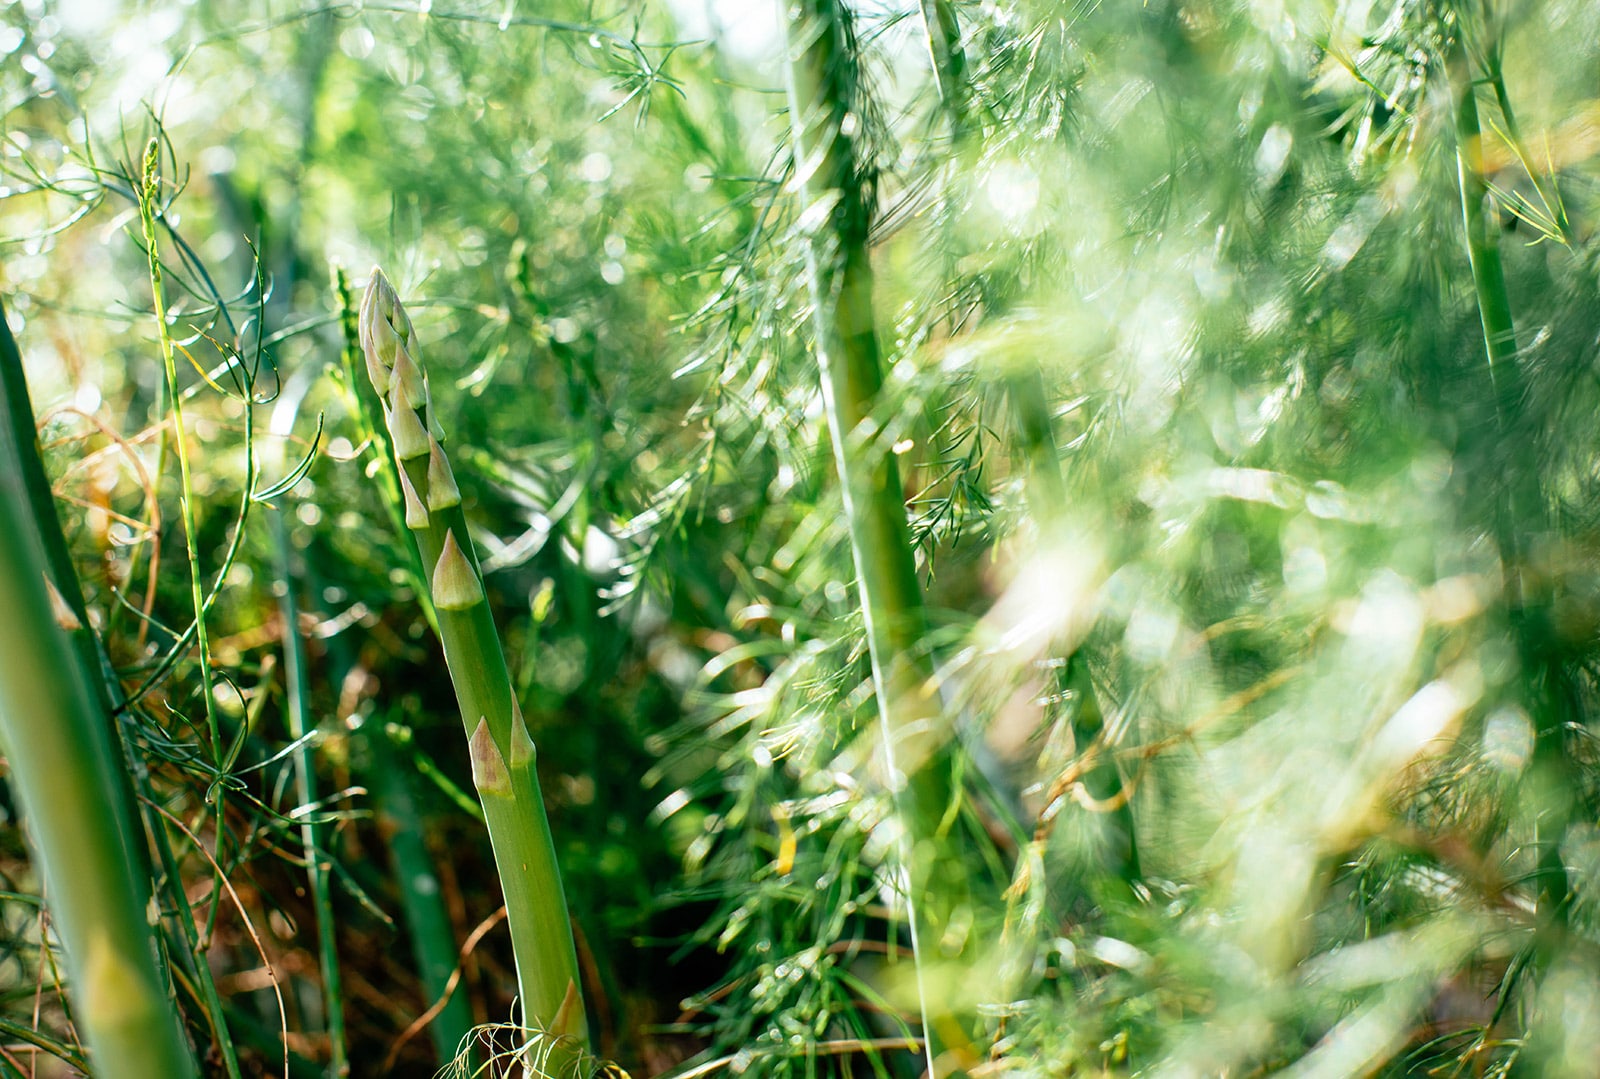 Green asparagus spears and asparagus ferns in a garden bed